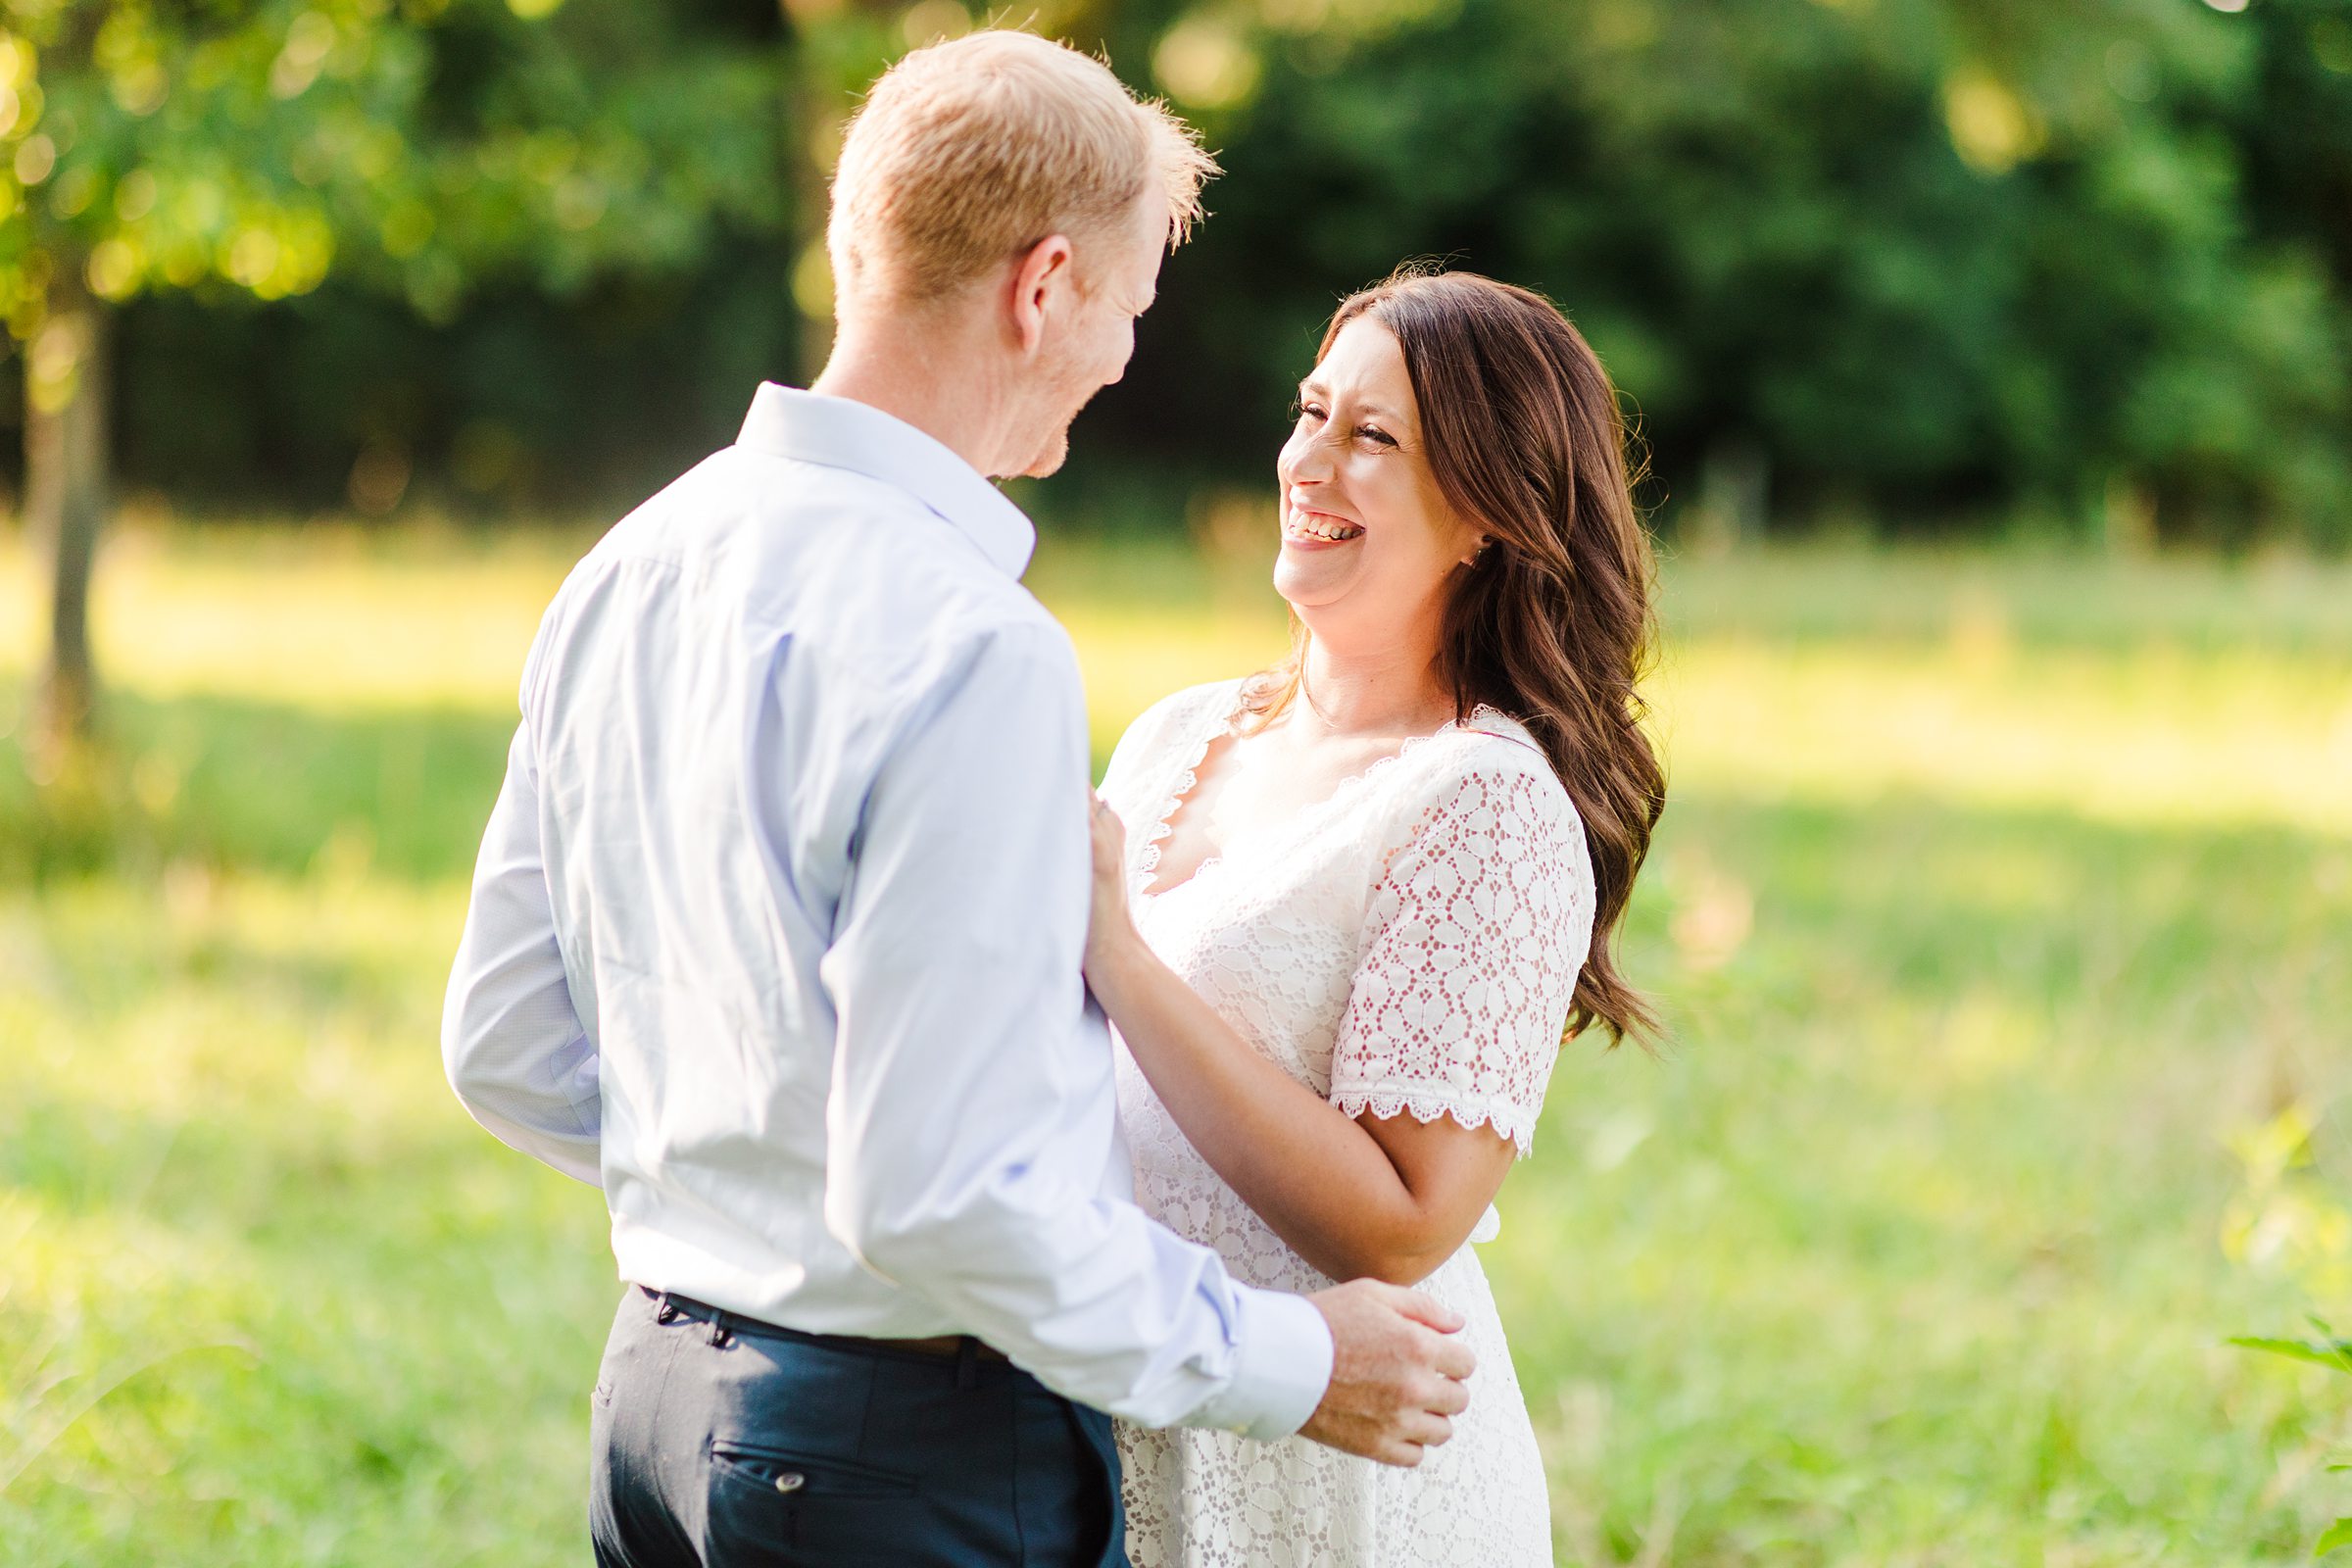 Couple celebrate their engagement in the countryside of central Illinois. Photo taken by Illinois Wedding Photographers, Joanna & Brett